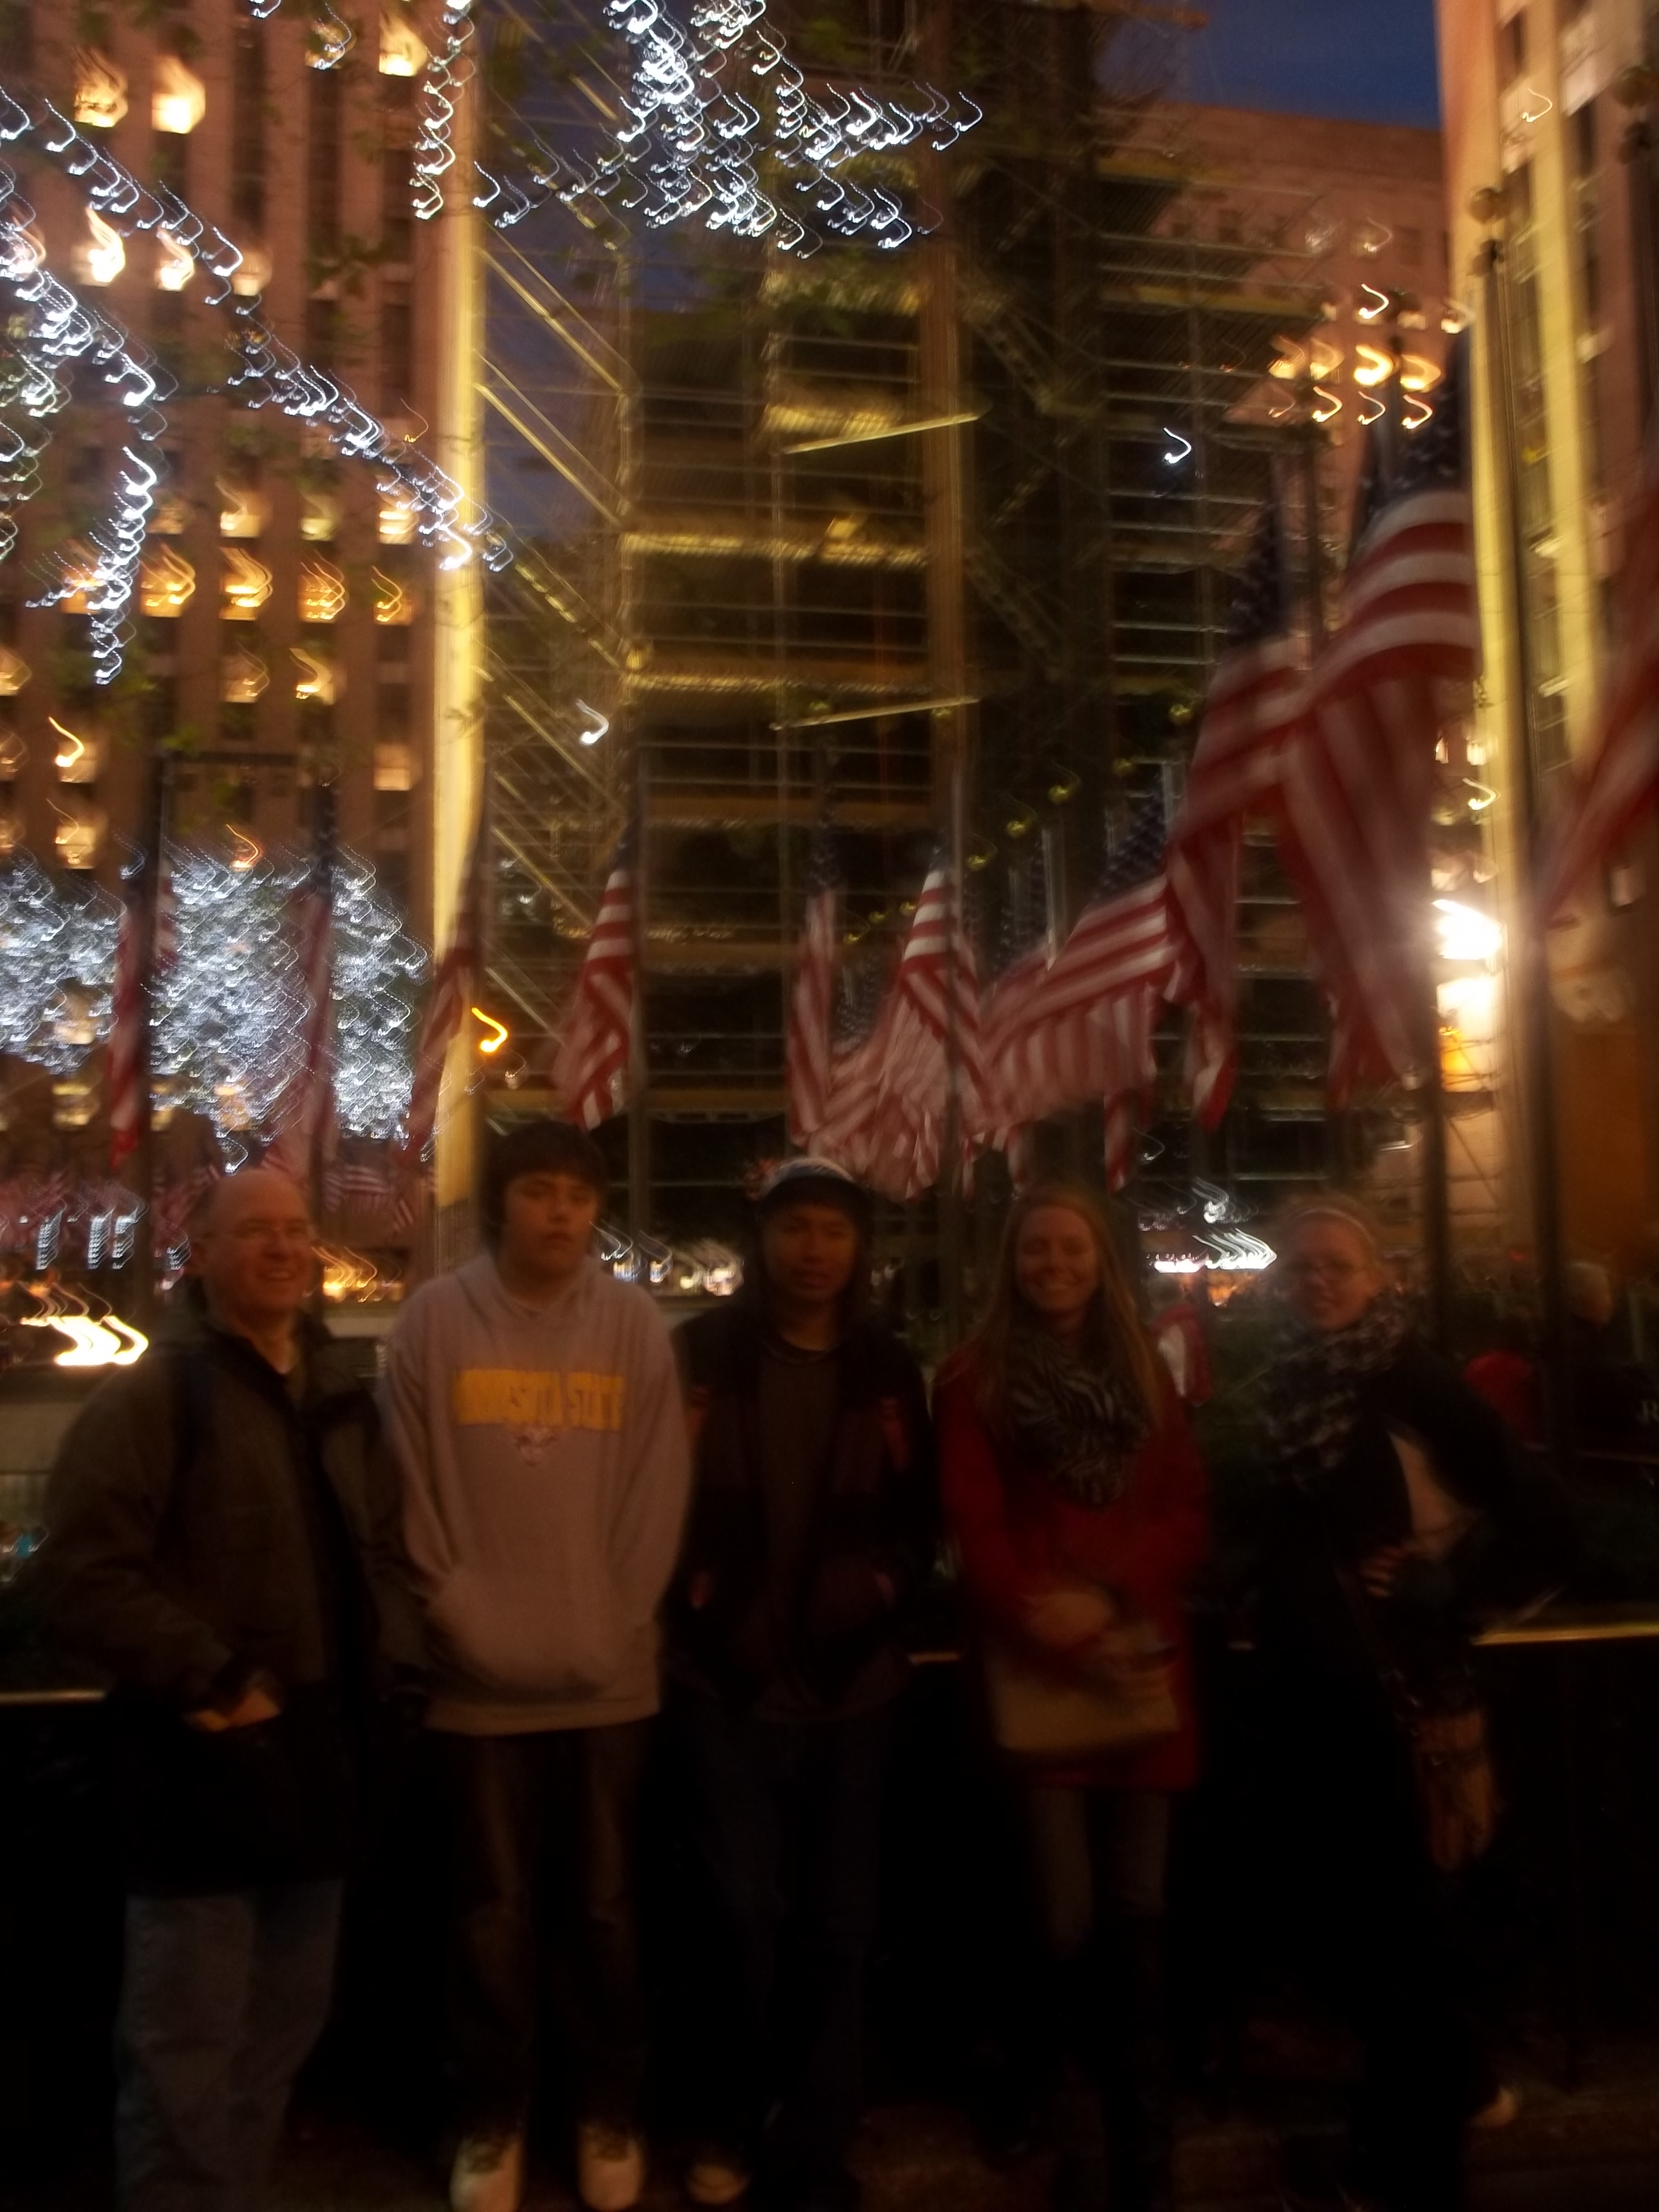 A quick group shot in front of the still-being-decorated Christmas tree at the Rockefeller Center!